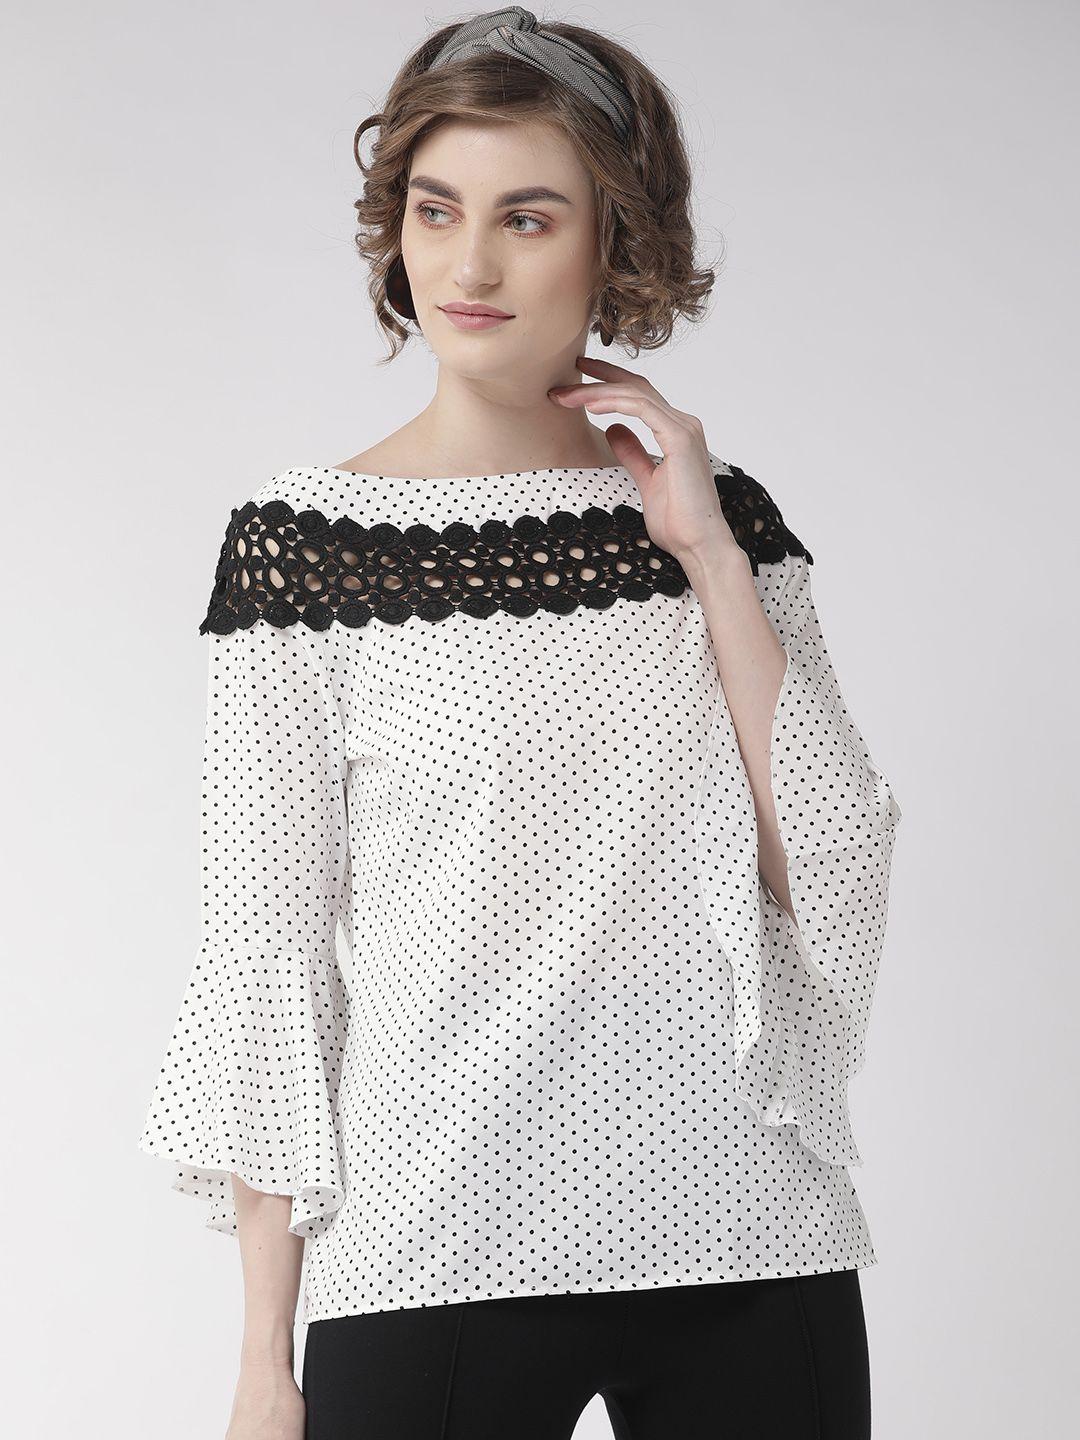 style-quotient-women-white-&-black-printed-top